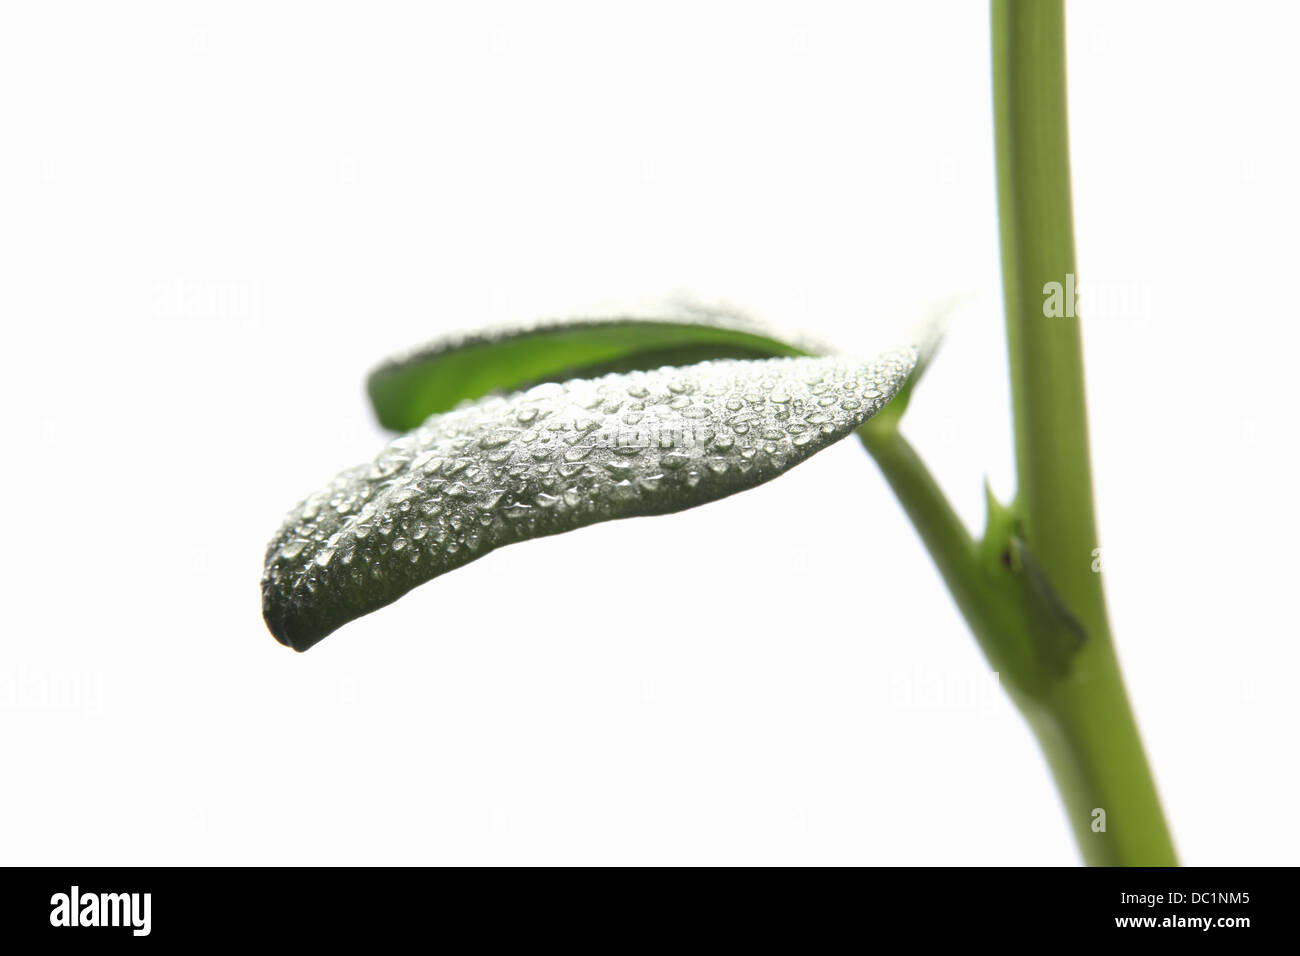 Close up detail of broad bean leaf and water droplets Stock Photo